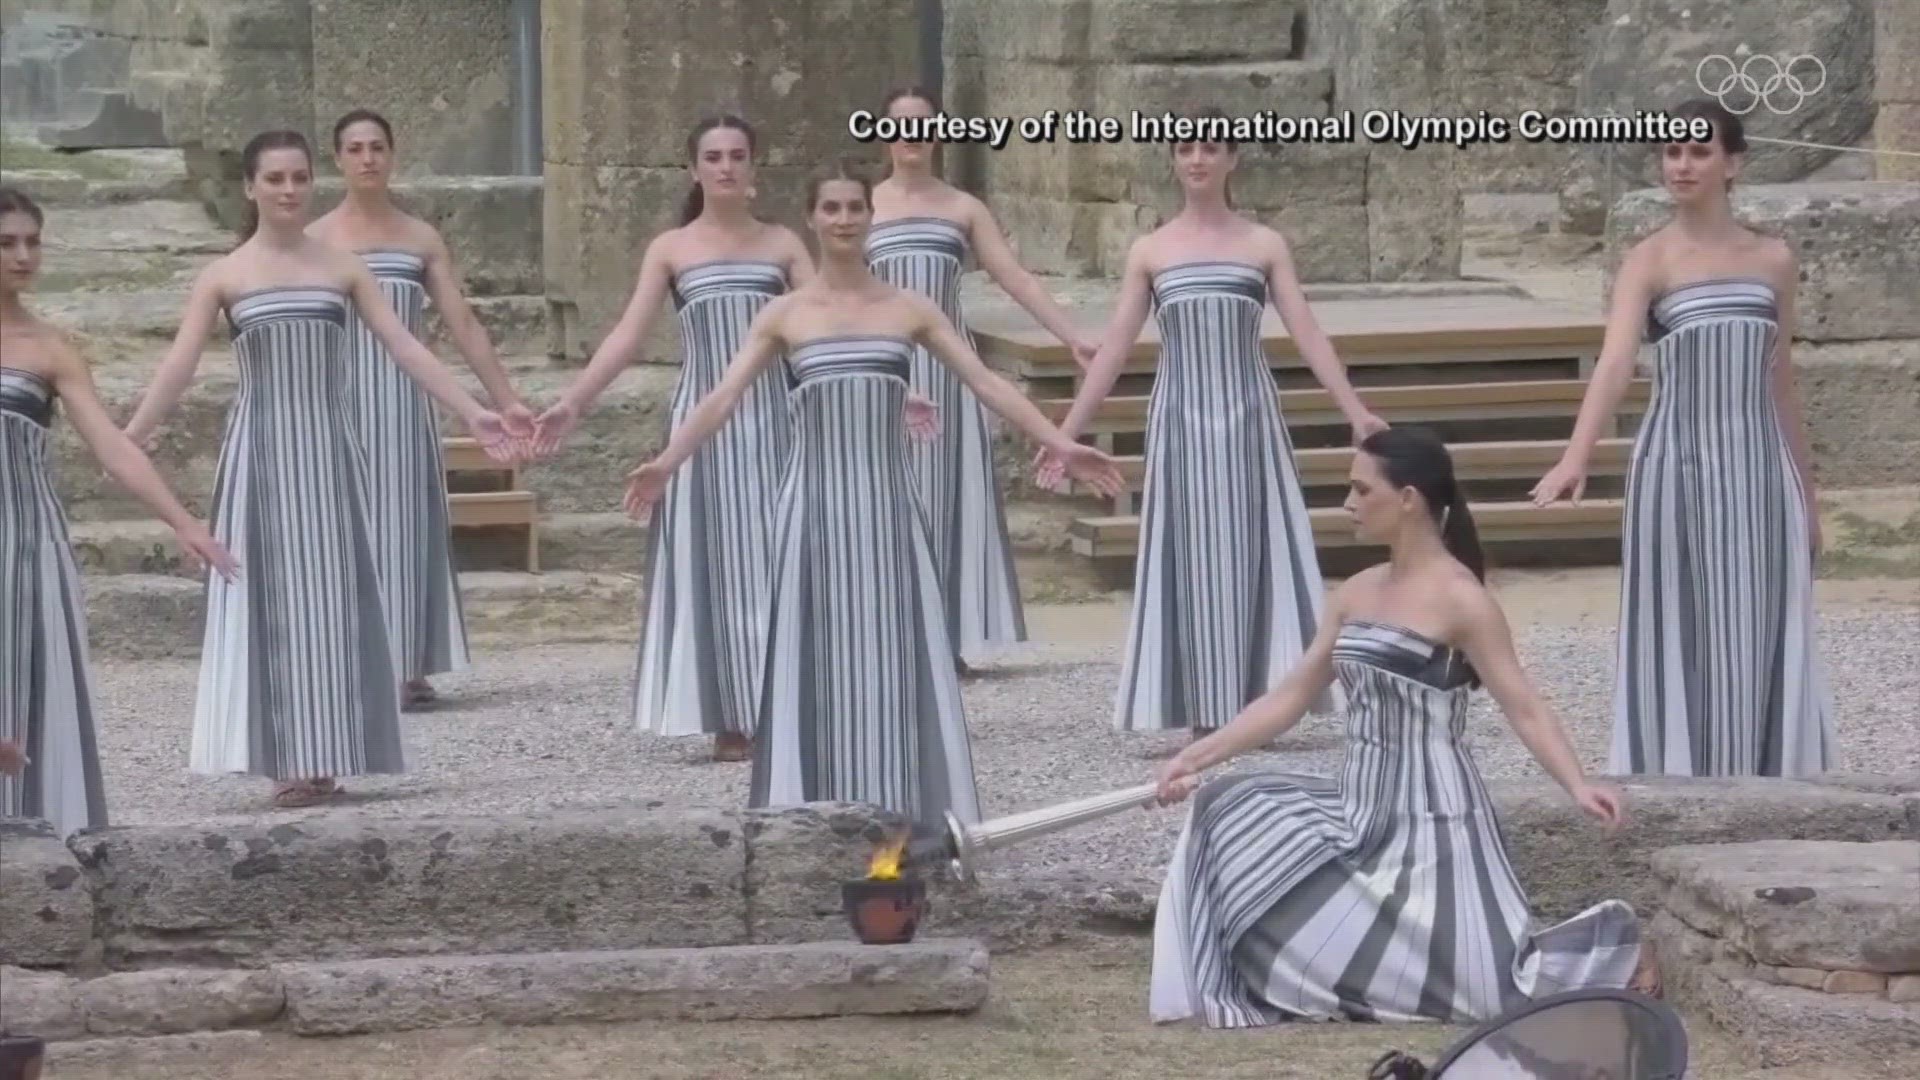 The ceremonial Olympic flame was lit yesterday in Greece.